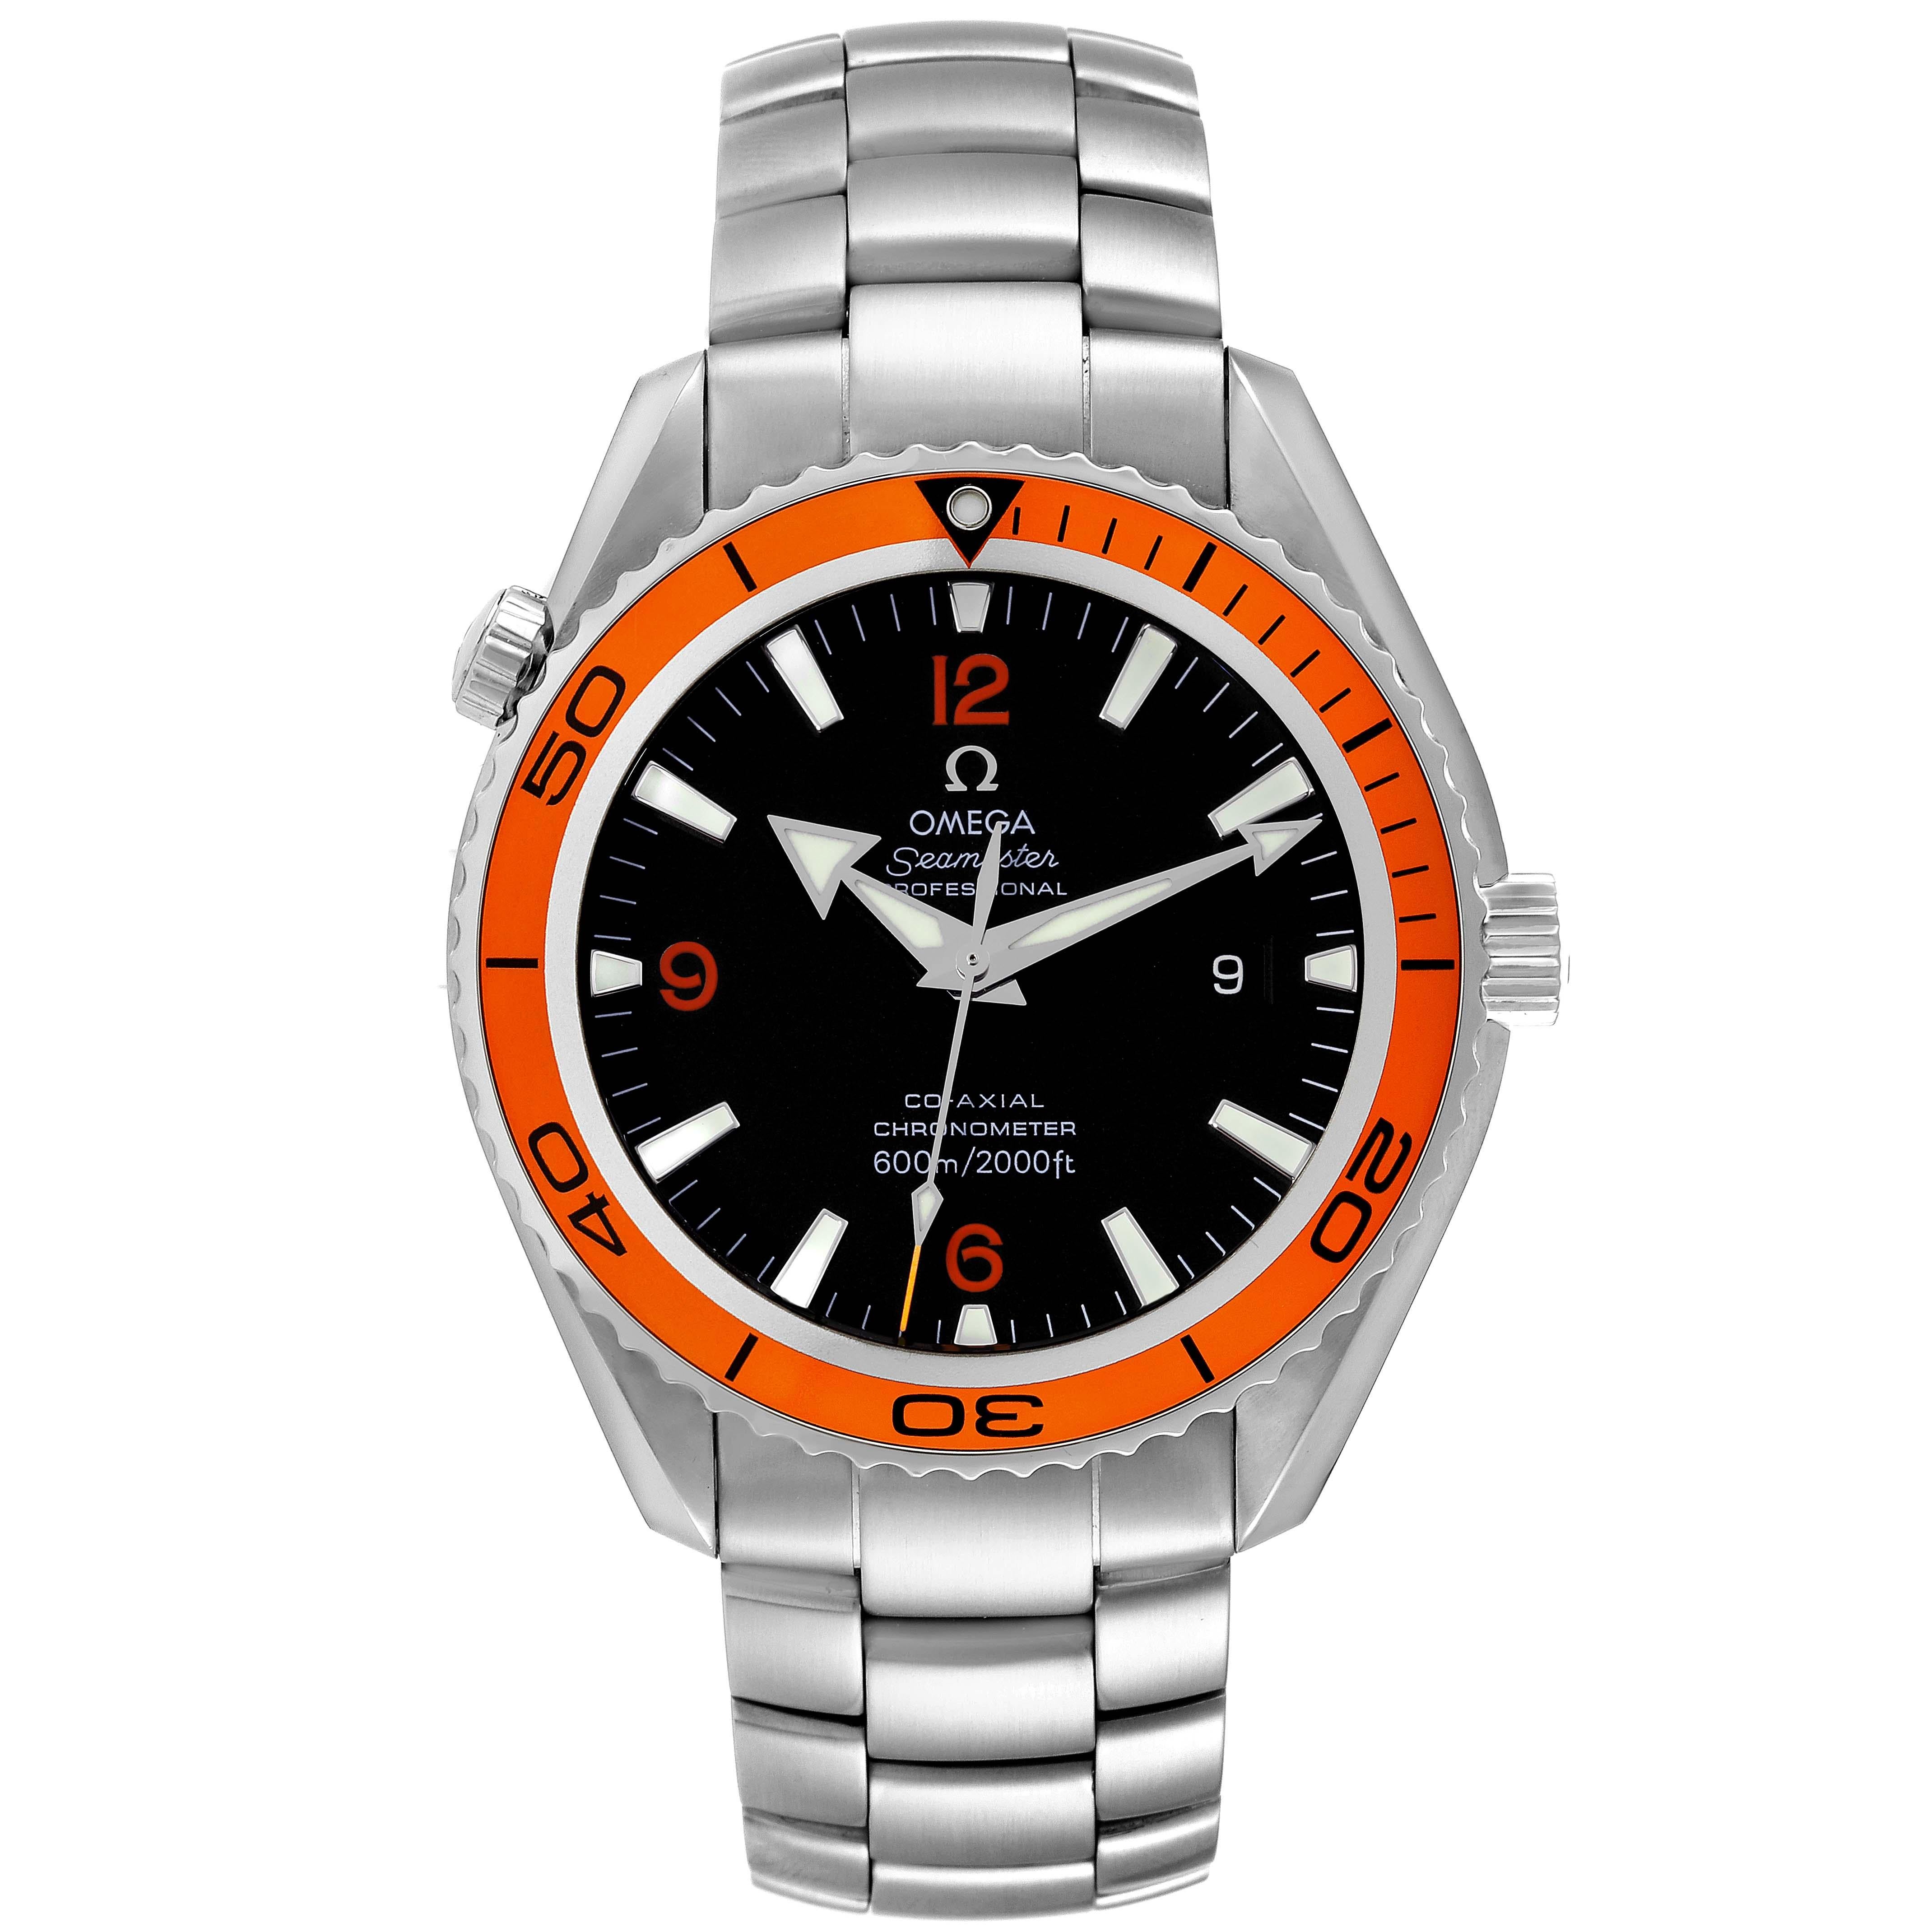 Omega Seamaster Planet Ocean Orange Bezel Steel Mens Watch 2208.50.00 Box Card. Automatic self-winding movement. Stainless steel round case 45.0 mm in diameter. Orange uni-directional rotating bezel. Scratch resistant sapphire crystal. Black dial